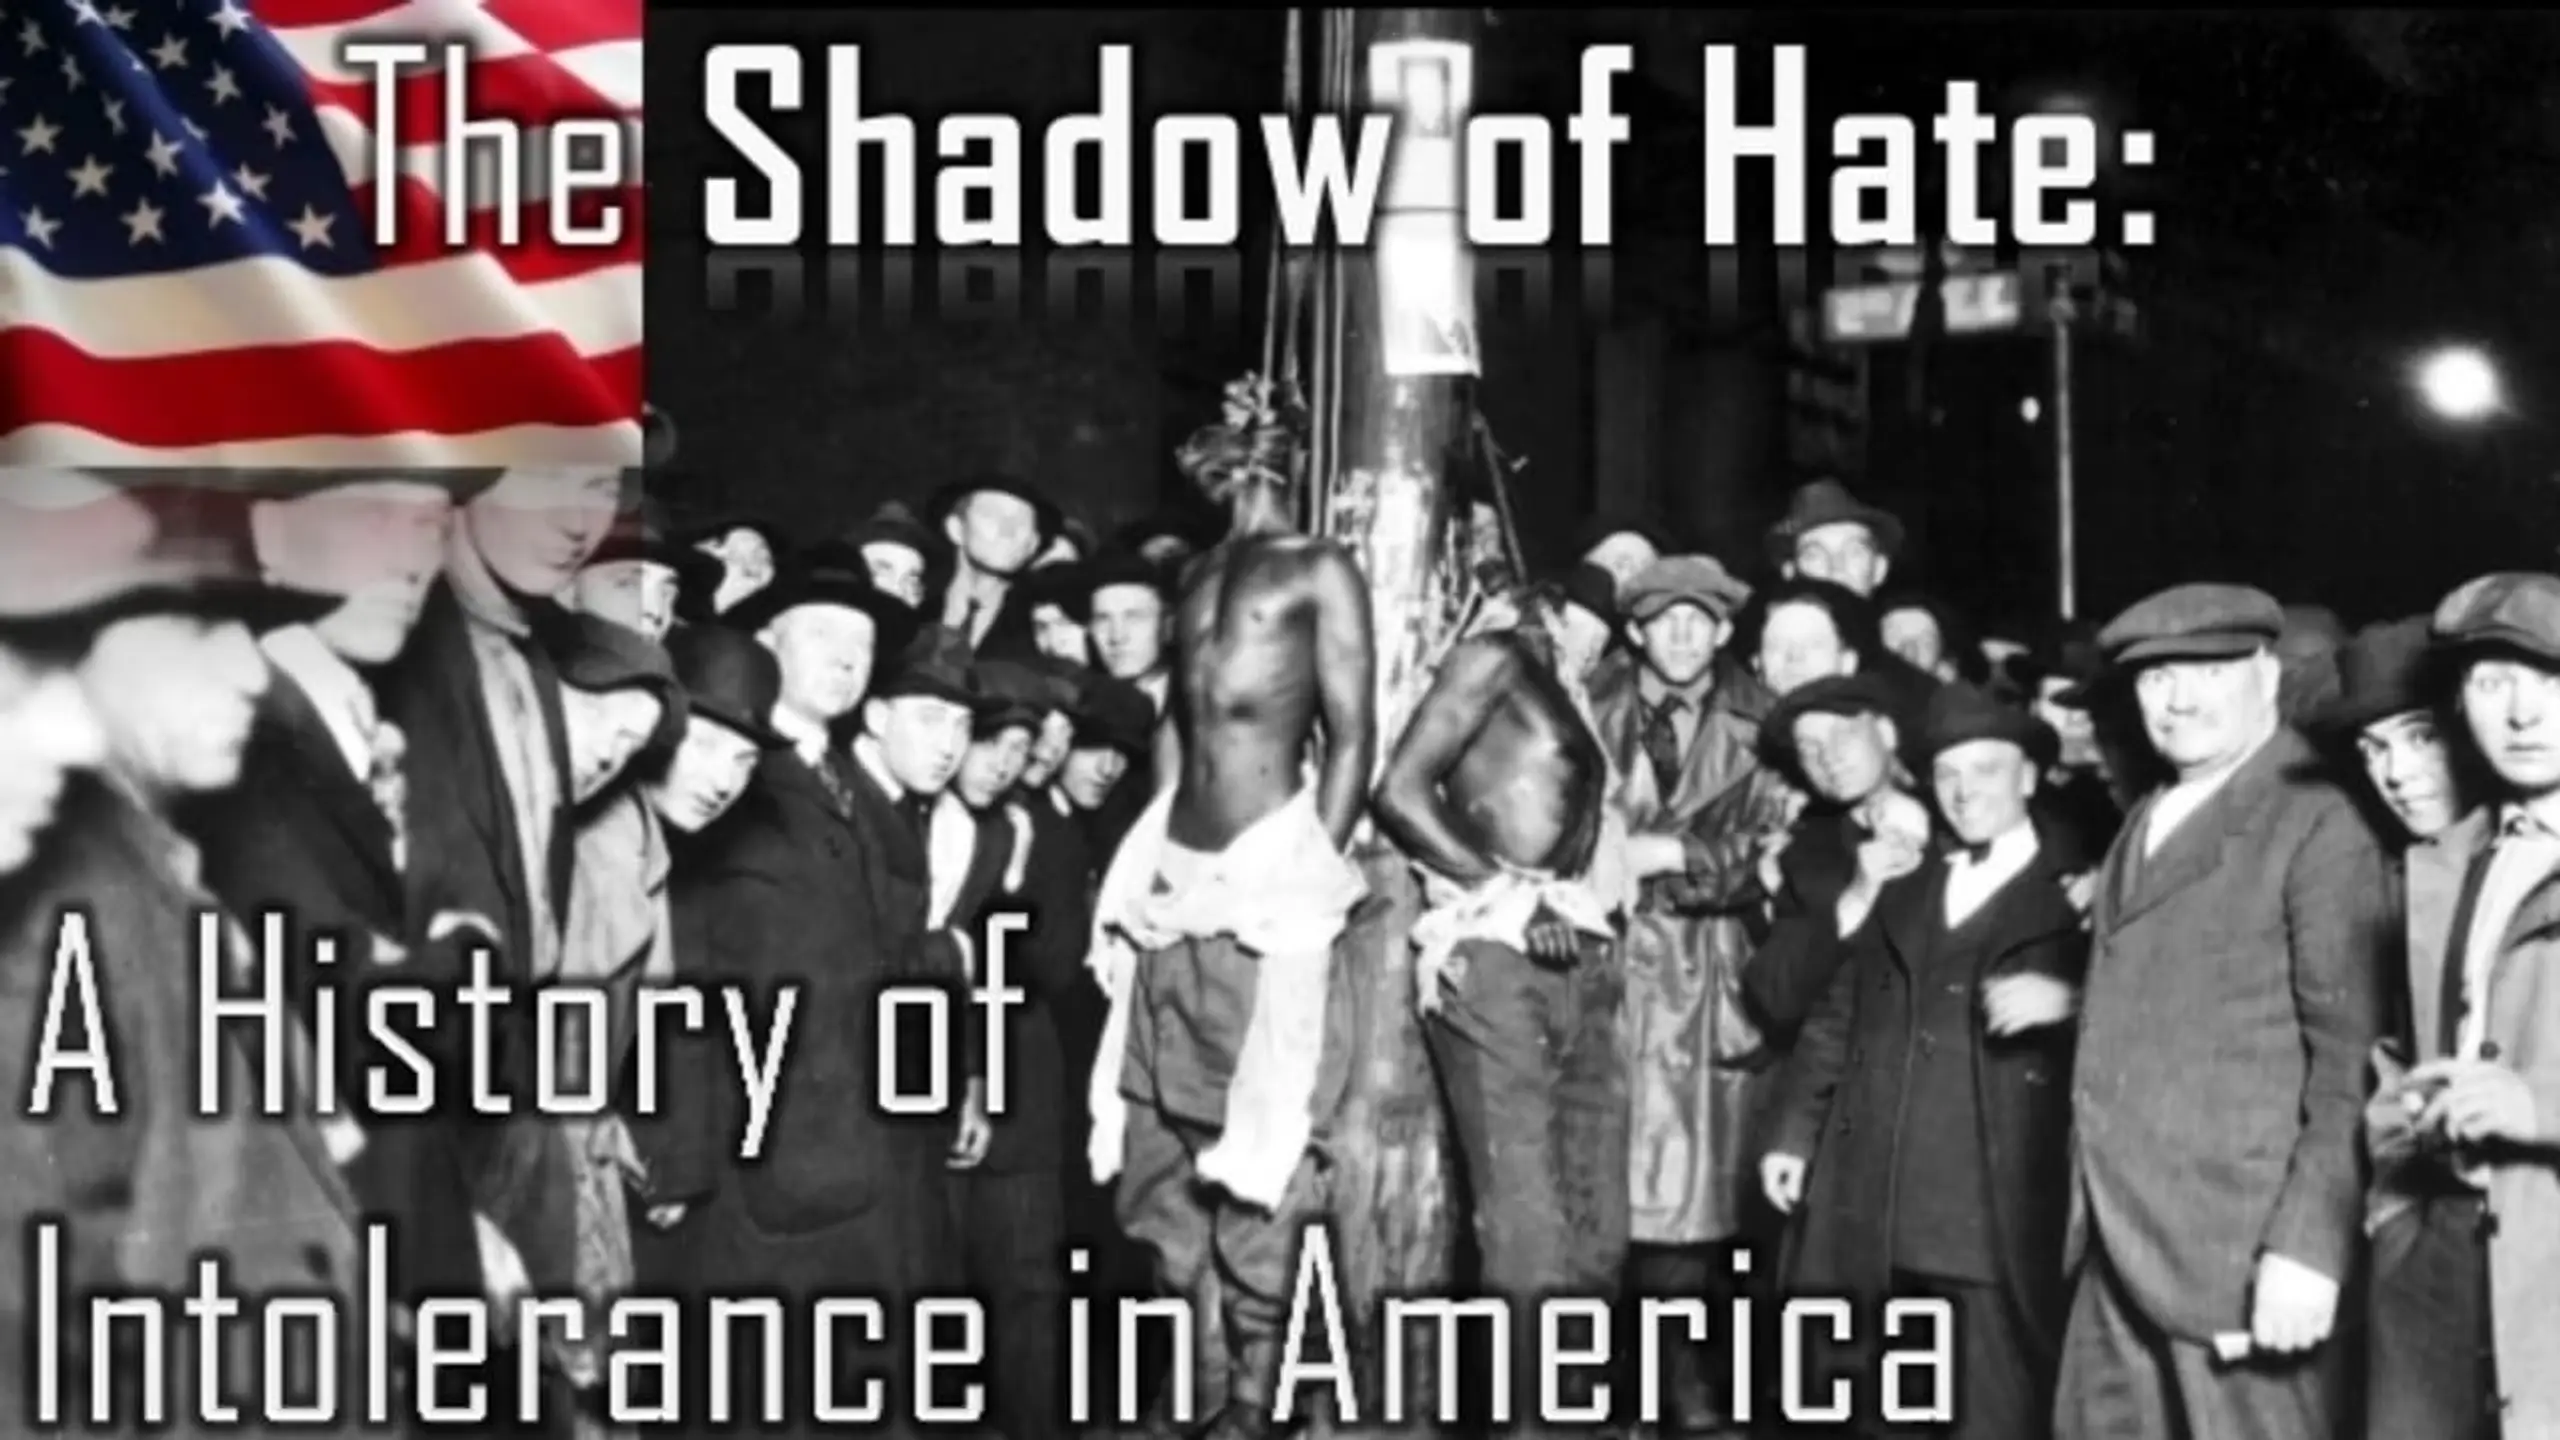 The Shadow of Hate